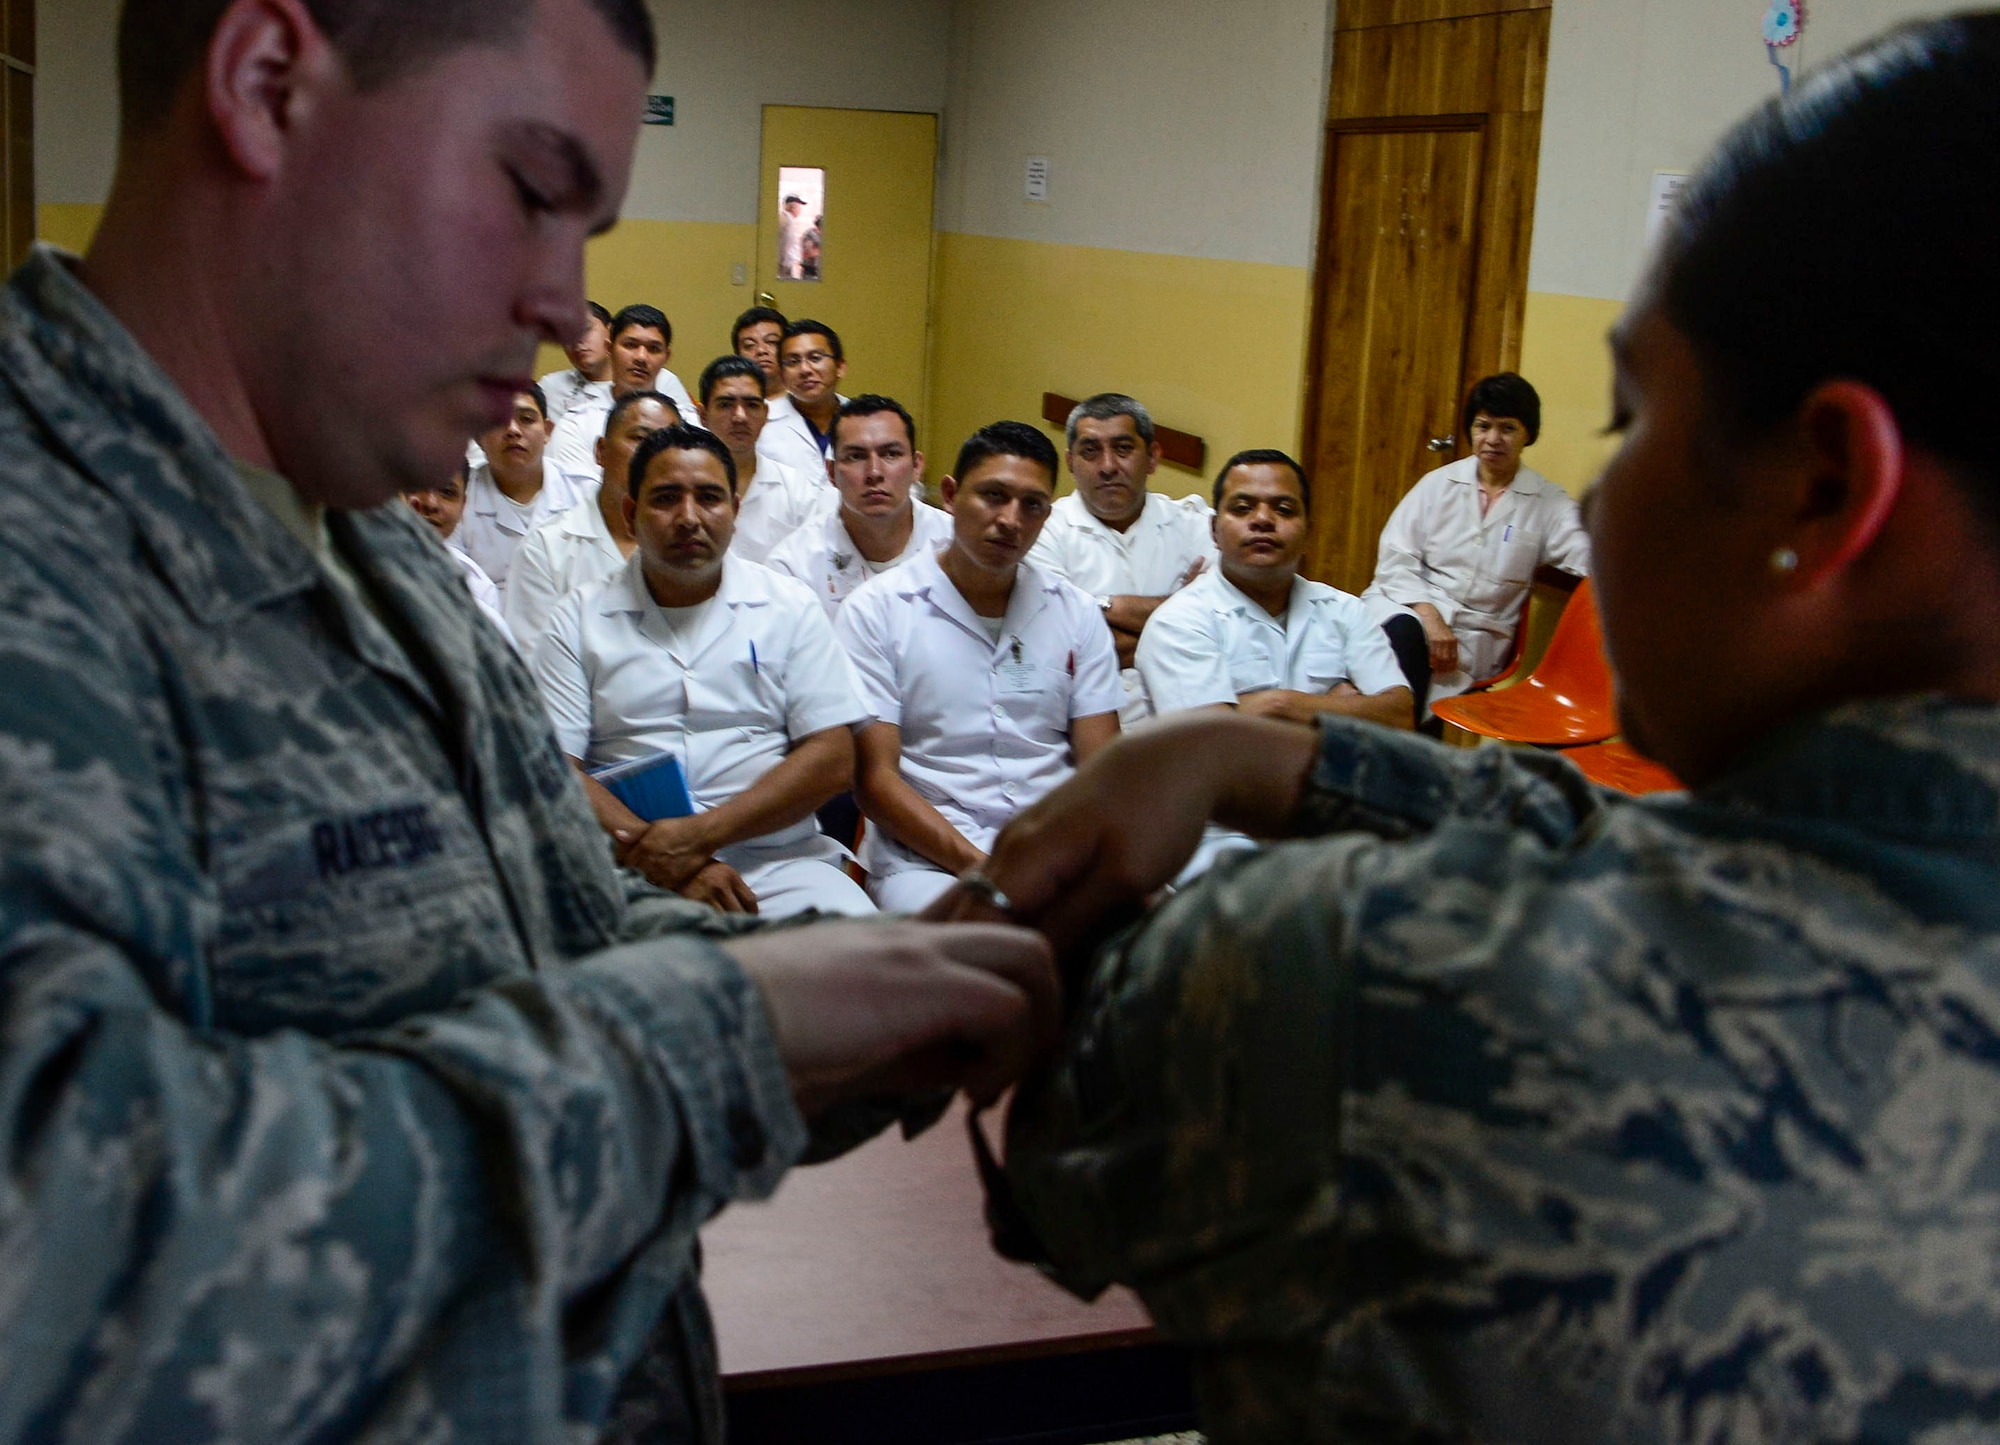 U.S. Air Force Senior Airman Jacob Radford and Staff Sgt. Karina Cortes, medical technicians stationed at Joint Base Charleston, S.C., demonstrate how to apply a tourniquet to medical technicians in training at Hospital Militar de El Salvador during a medical subject matter expert exchange in San Salvador, El Salvador, March 11, 2016. Earlier in the week, Carey led a team of Air Force medical professionals in a week-long exchange with Salvadoran medics at Ilopango Air Base.  After the subject matter expert exchange was completed, the team was invited to a share their expertise with members of the Hospital Militar de El Salvador.  (U.S. Air Force photo by Tech. Sgt. Heather R. Redman/Released)